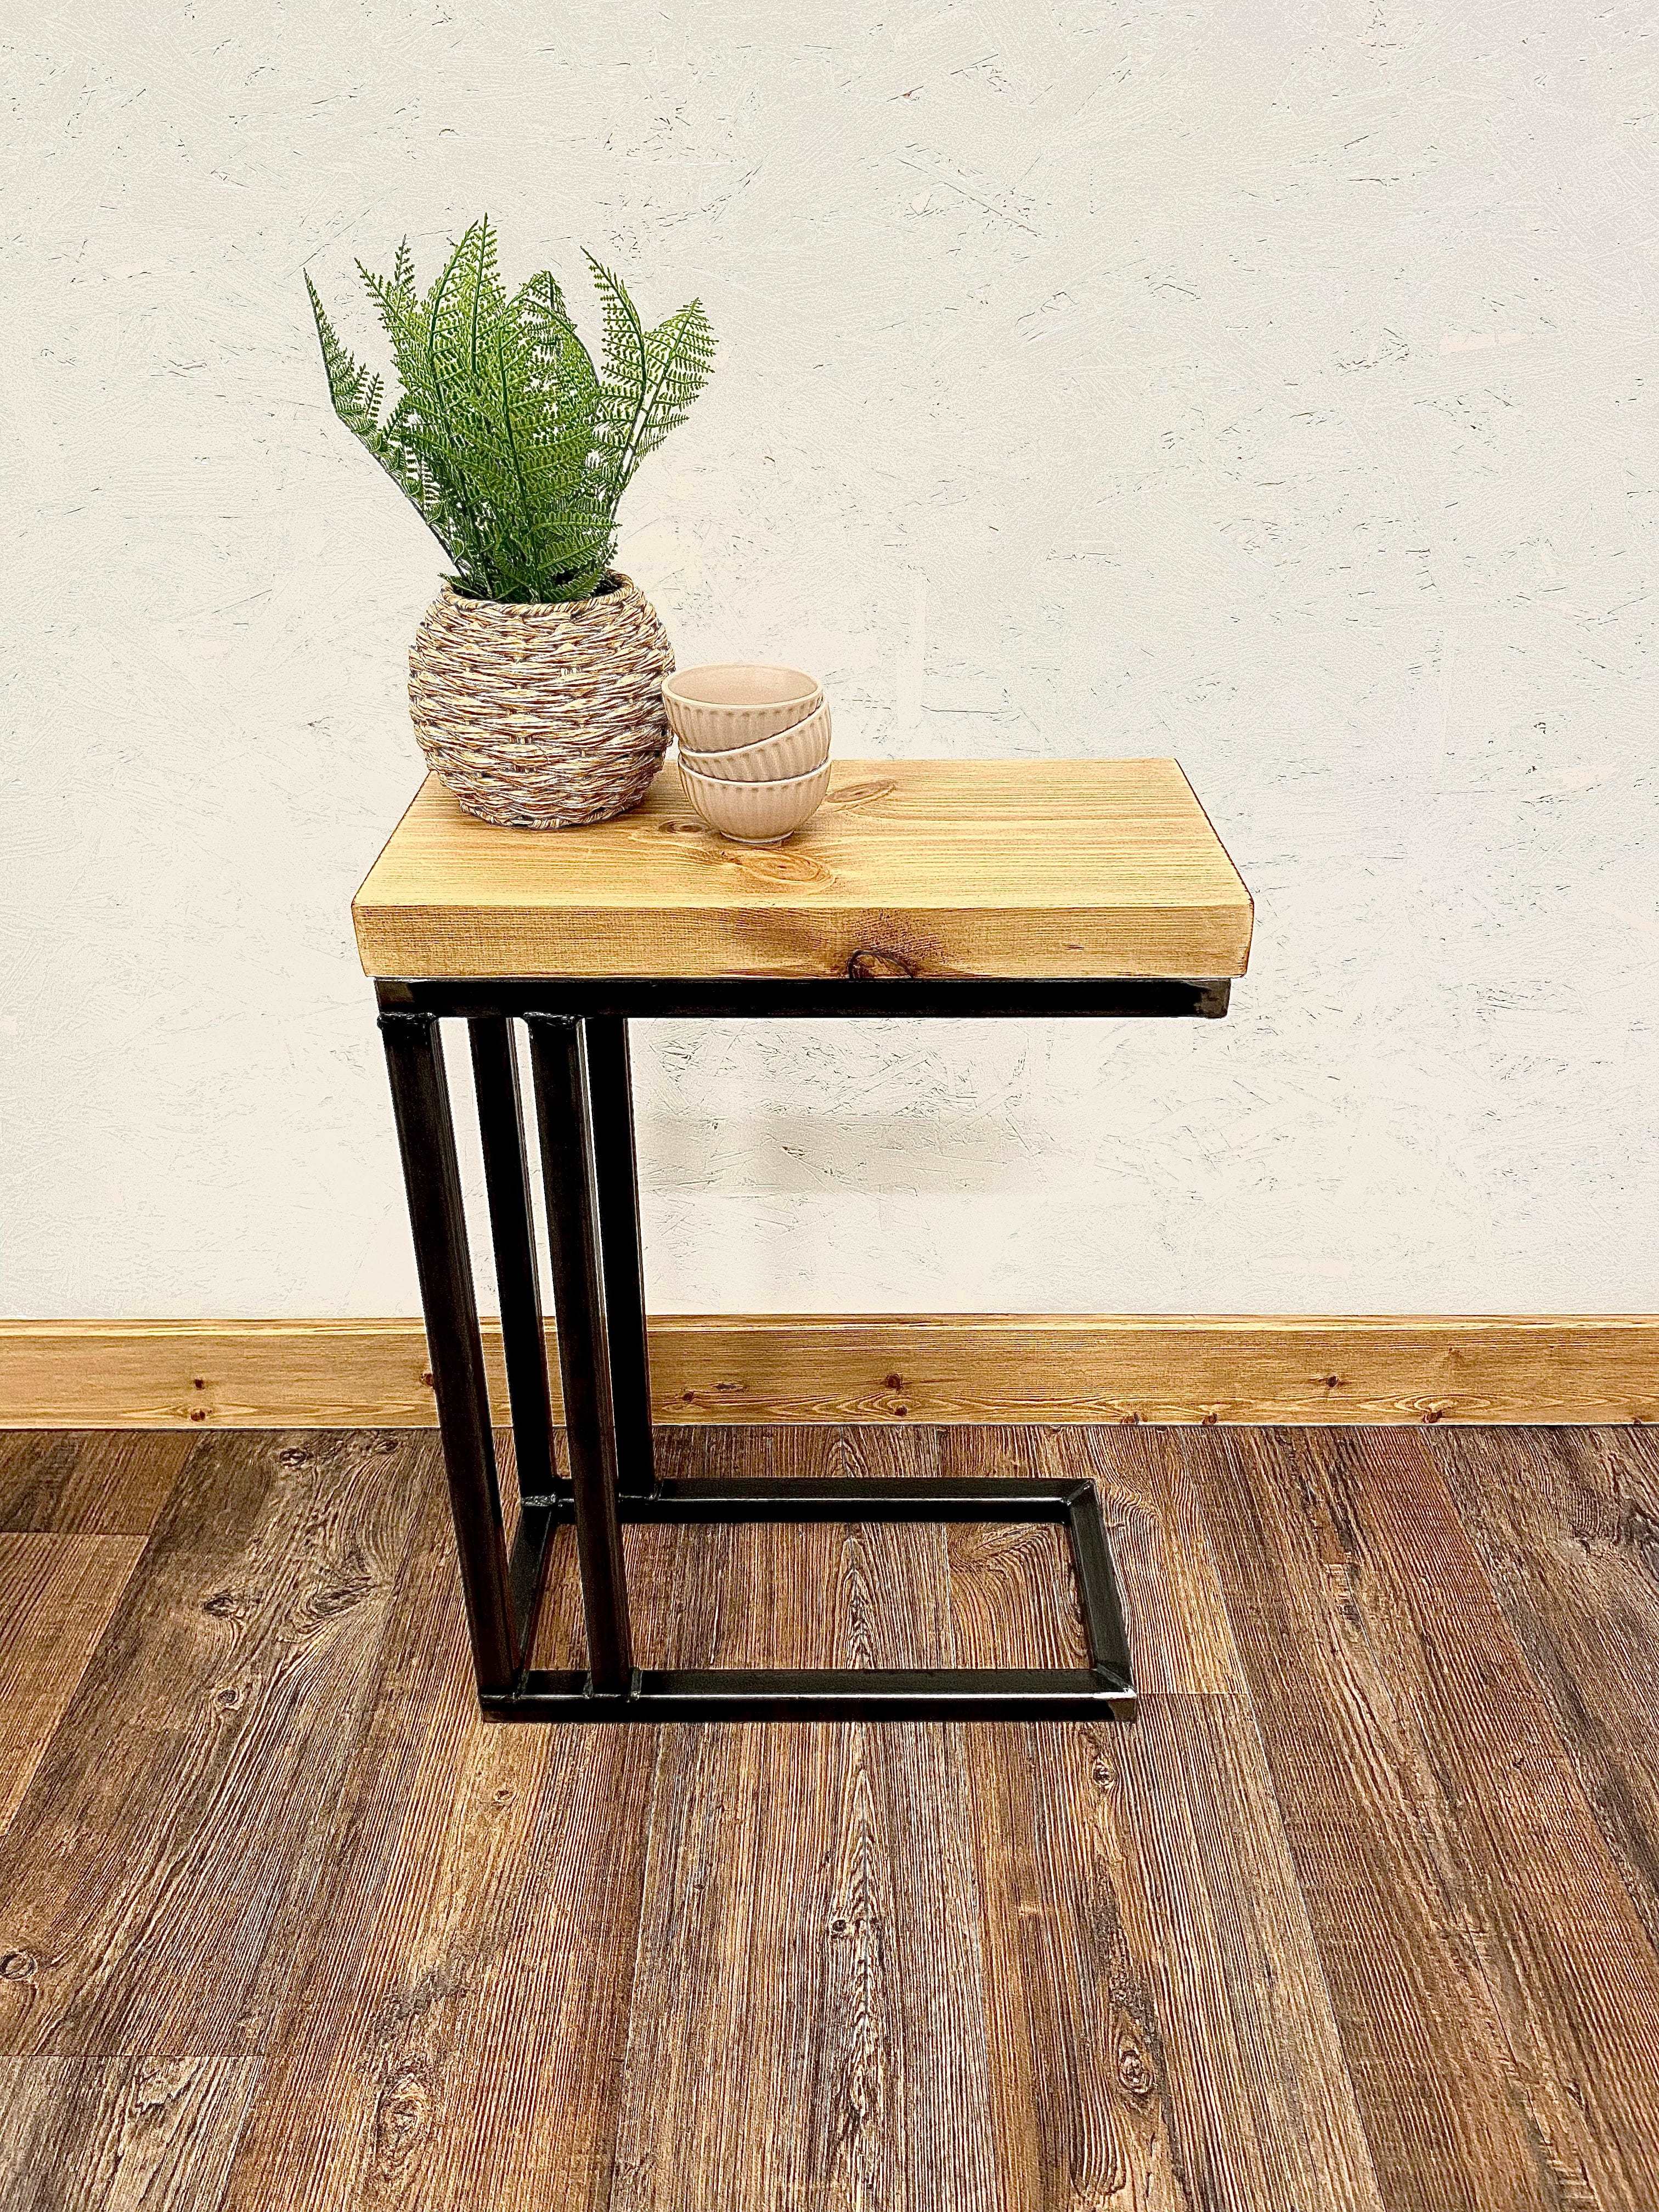 Rustic C Shaped Side Table  RSD Furniture   